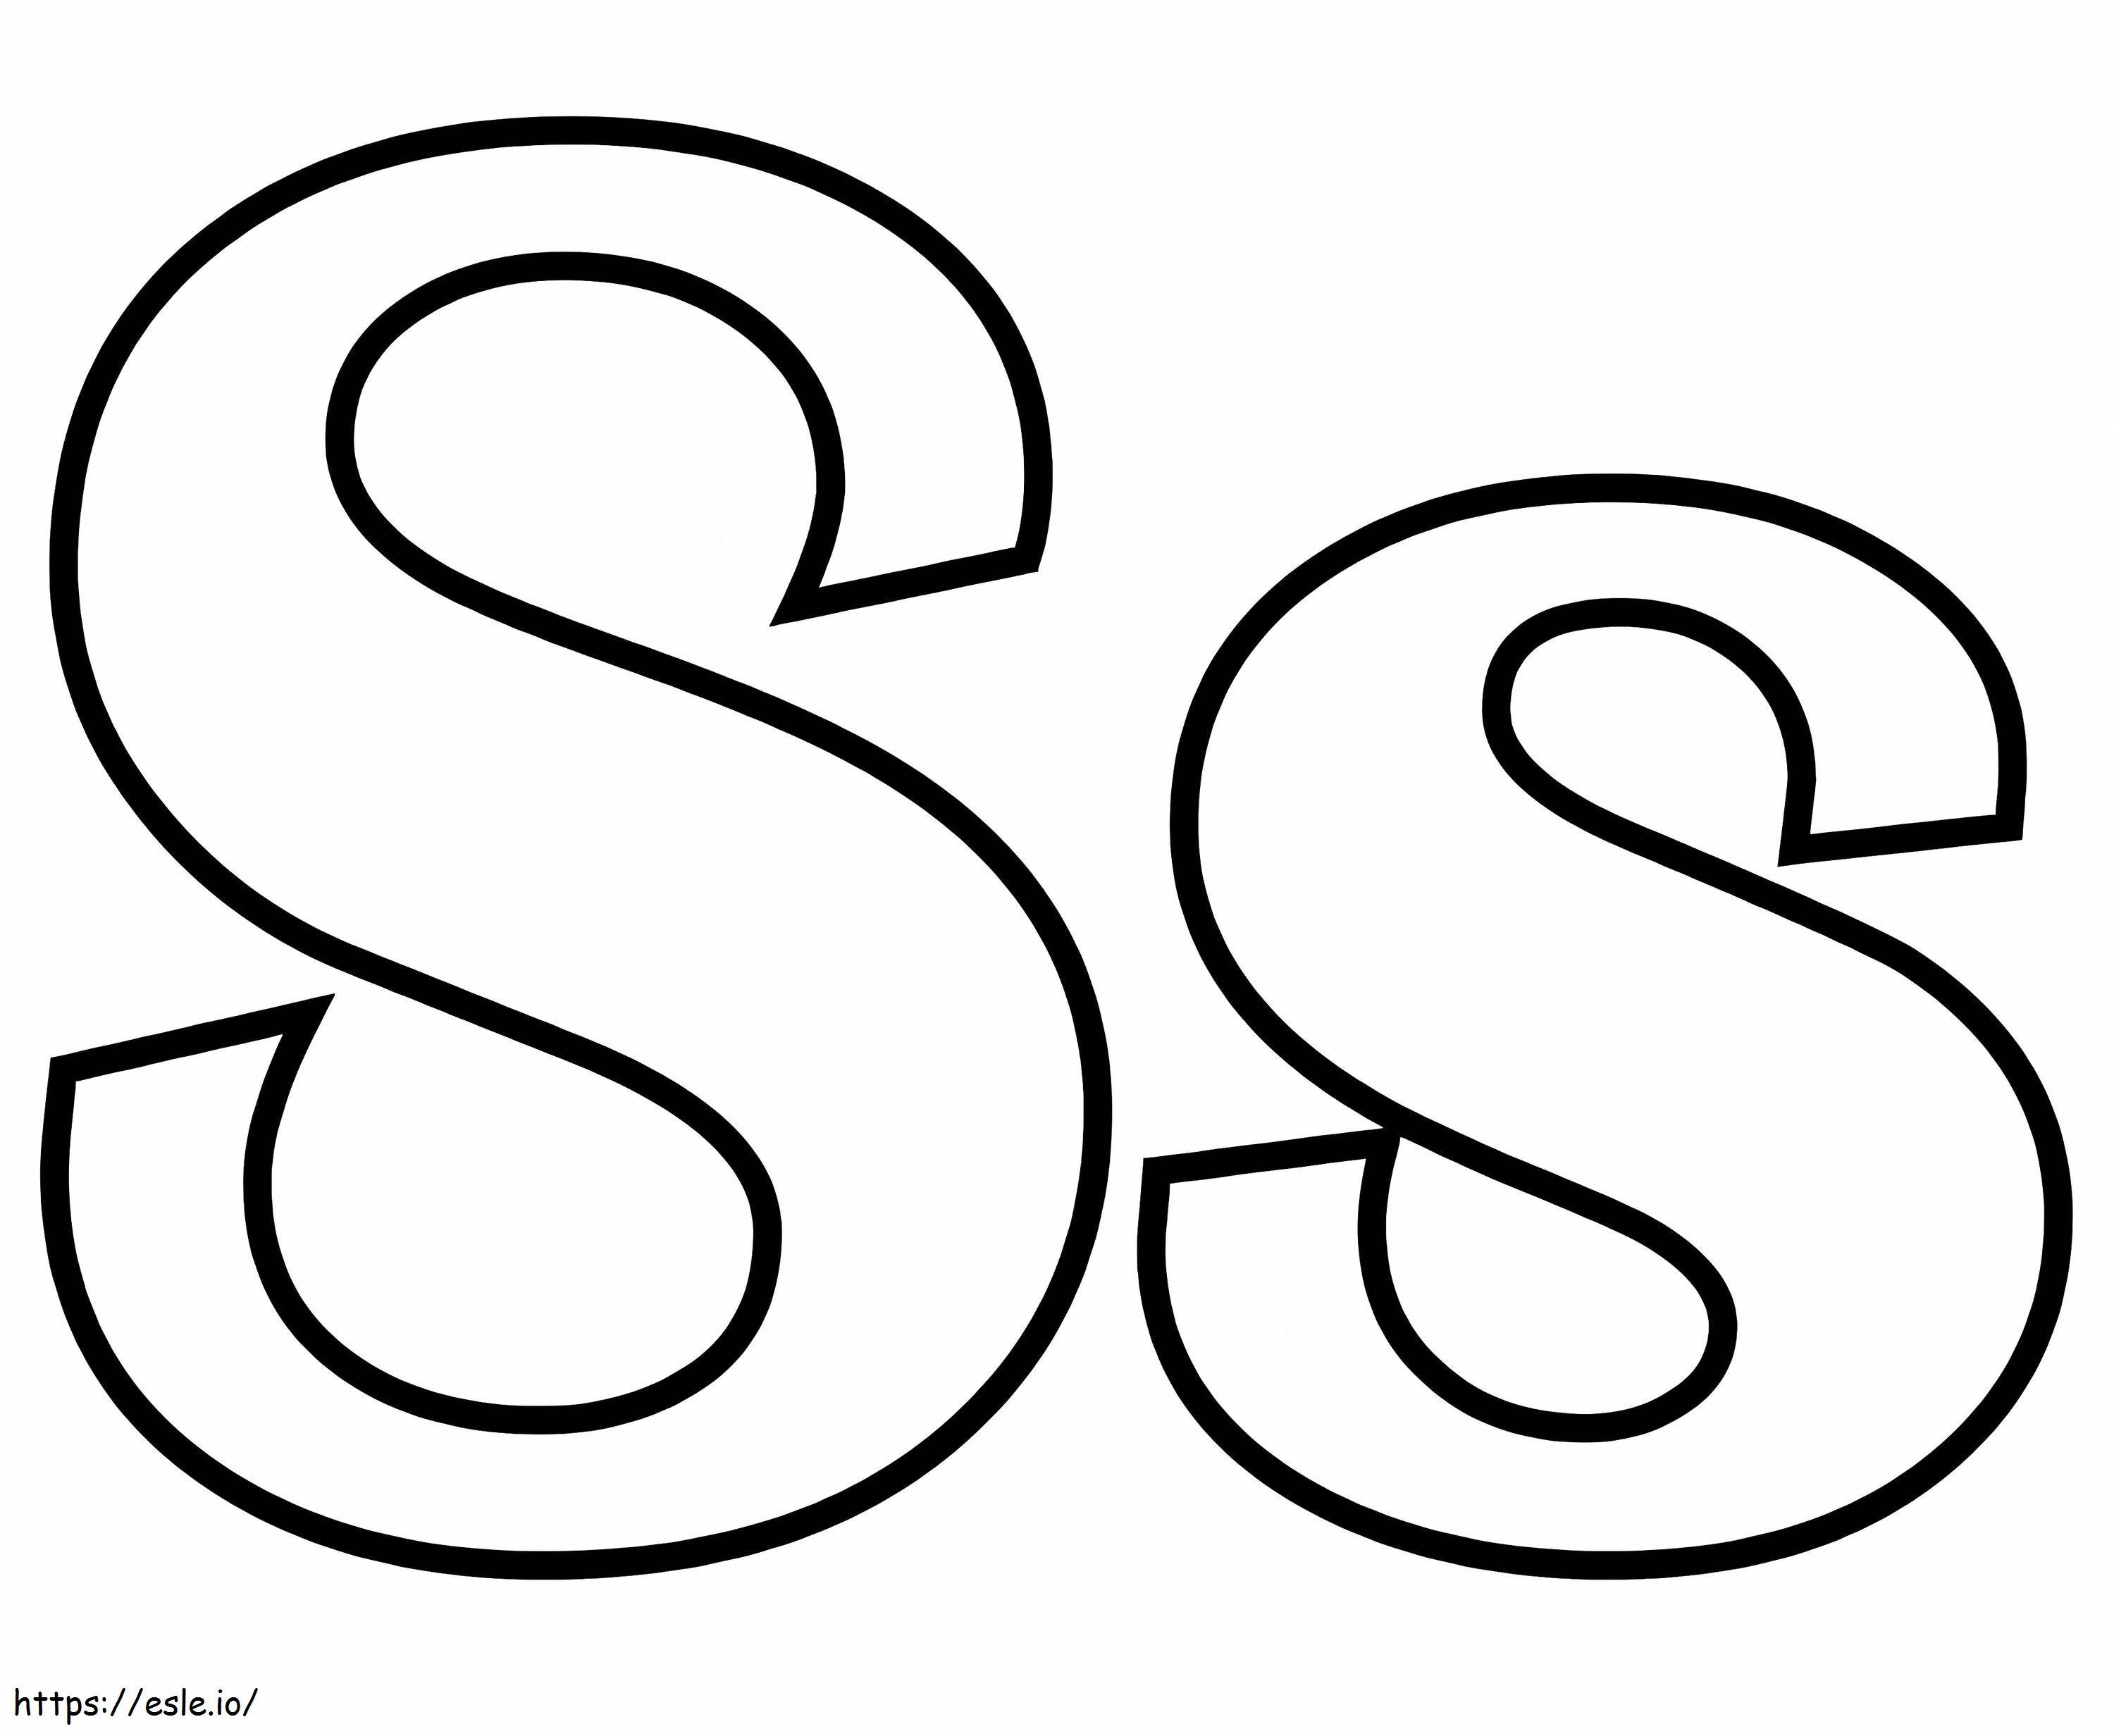 Letter S 3 coloring page